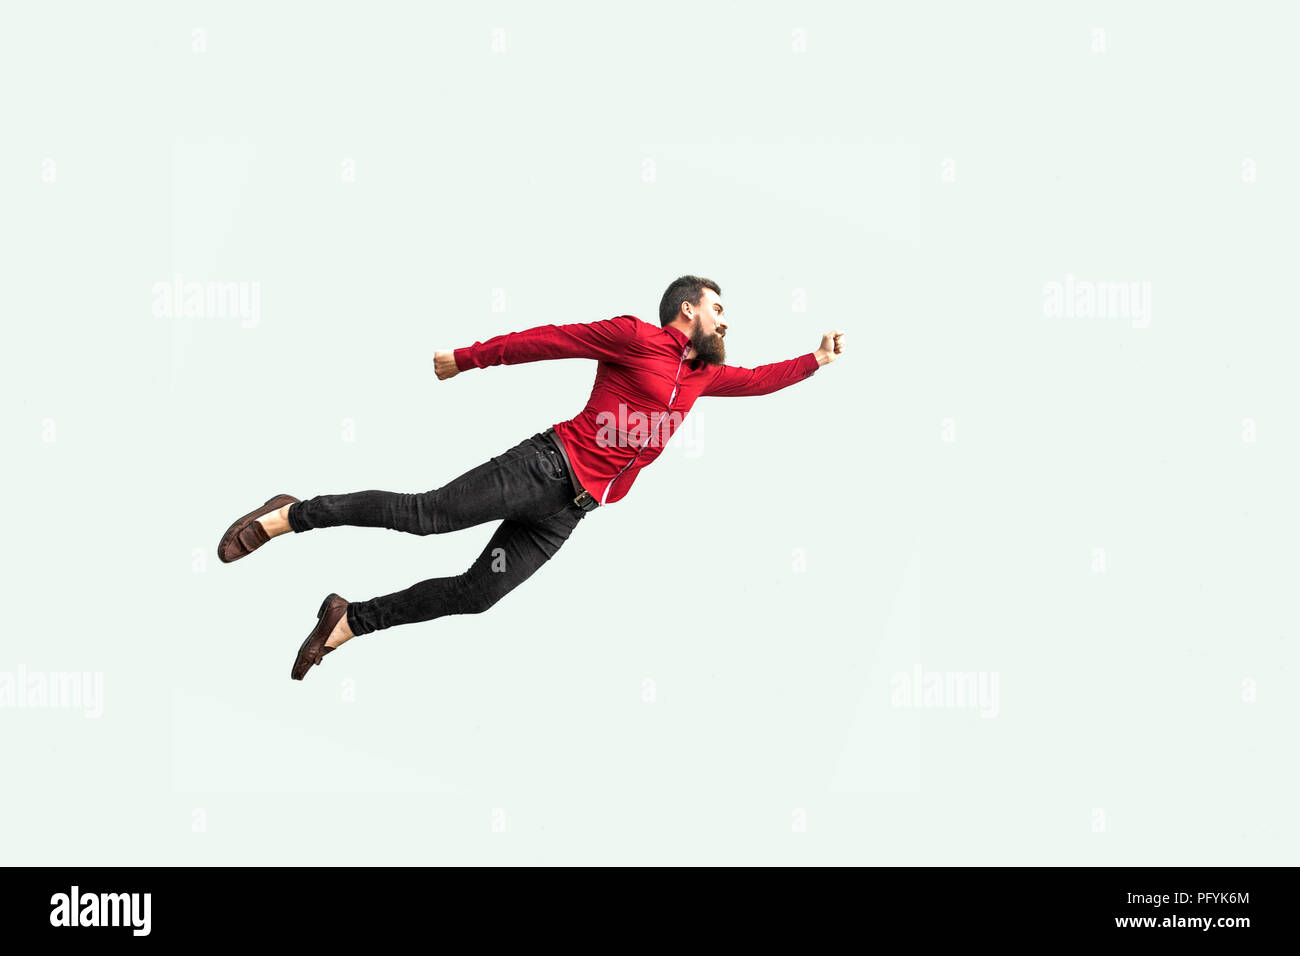 Superman style. Enthusiasm concept. strong bearded businessman felt himself a superhero and flying up. indoor studio shot isolated on gray background. Stock Photo